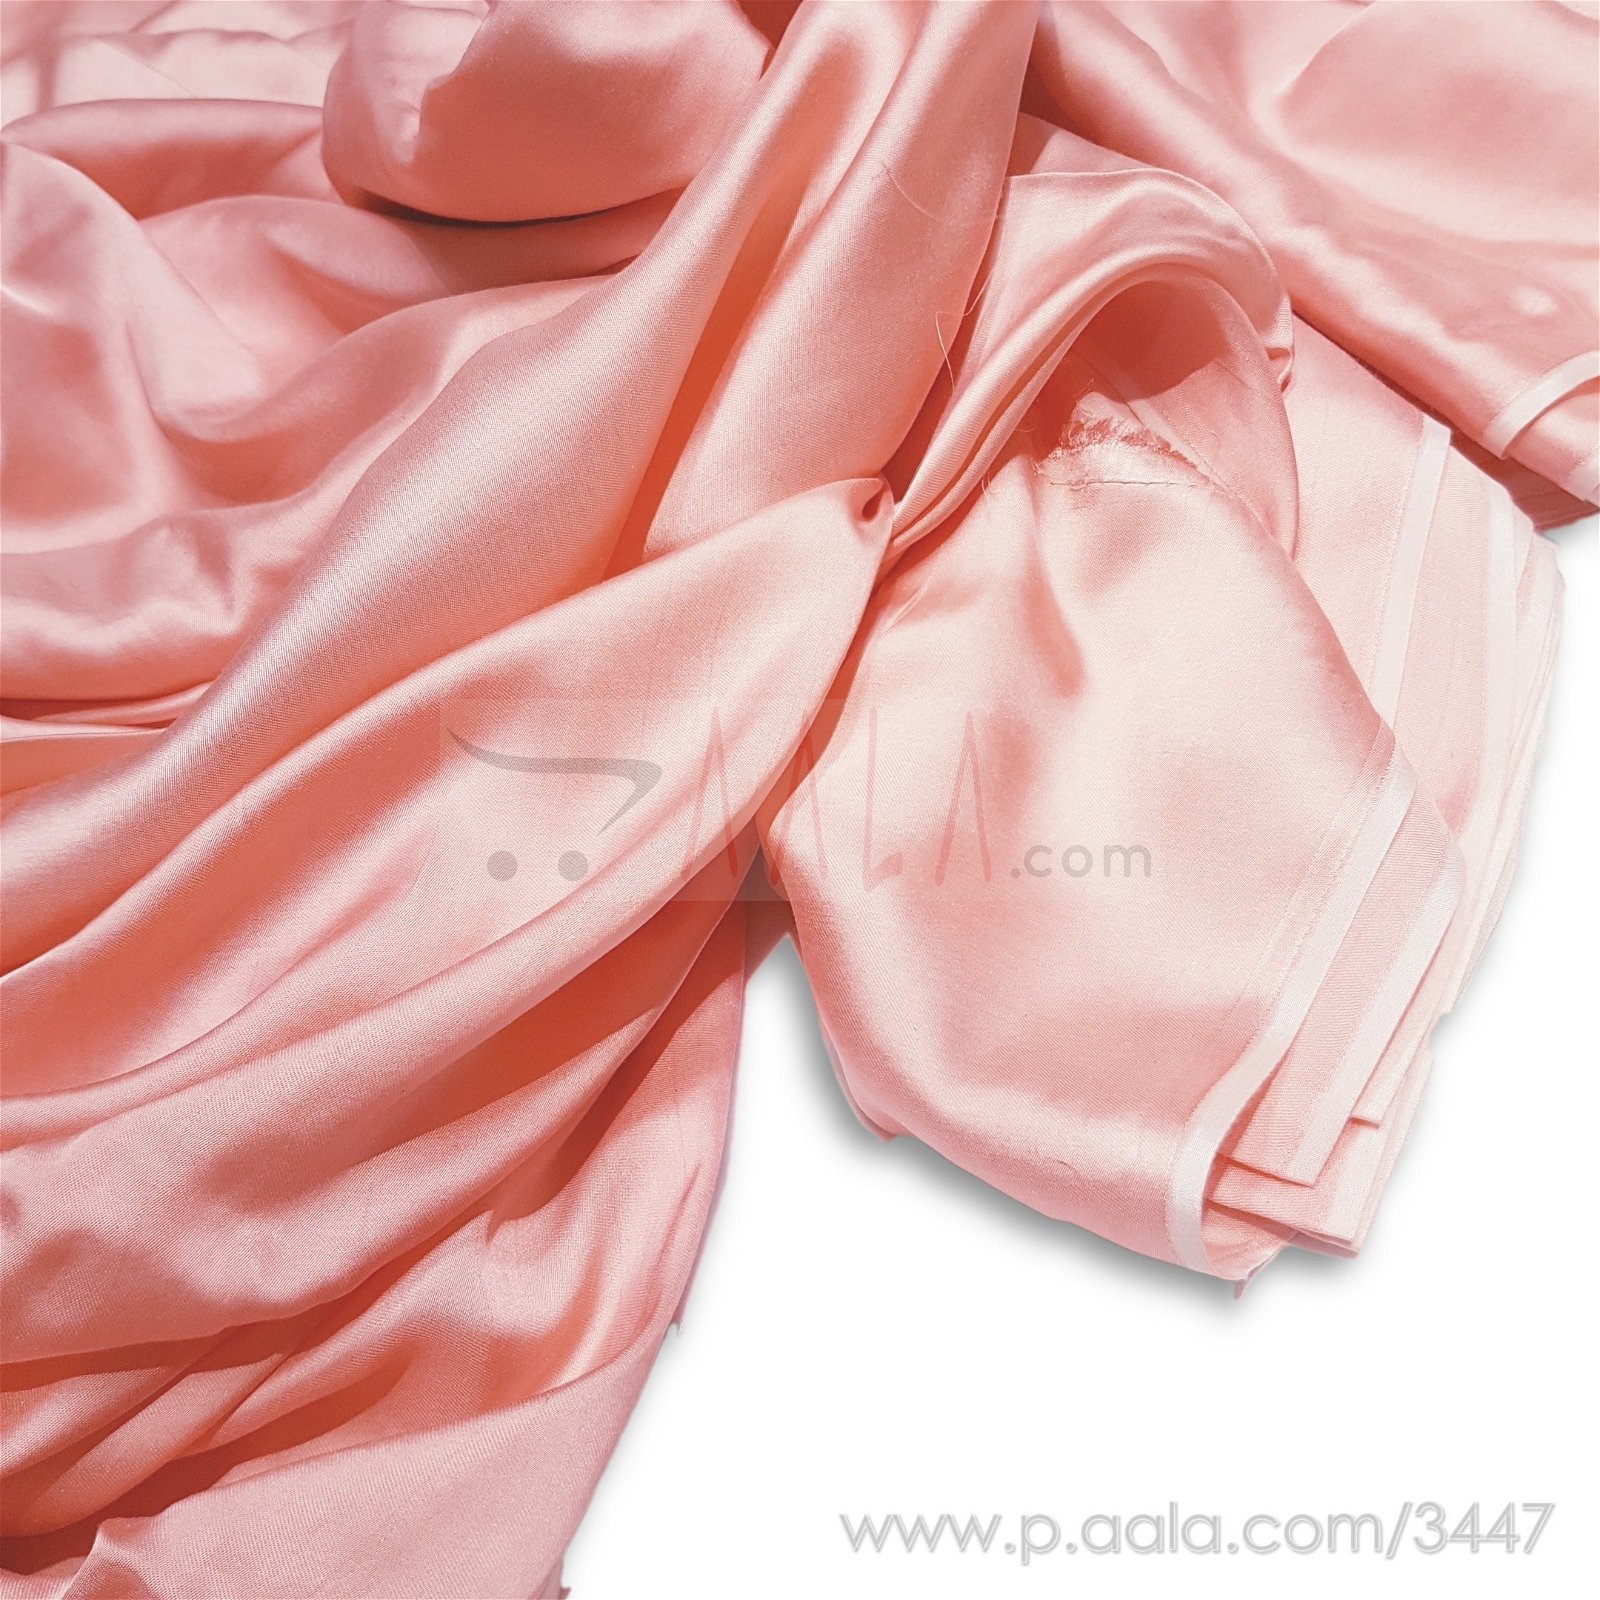 Modal Satin Viscose 44 Inches Dyed Per Metre #3447